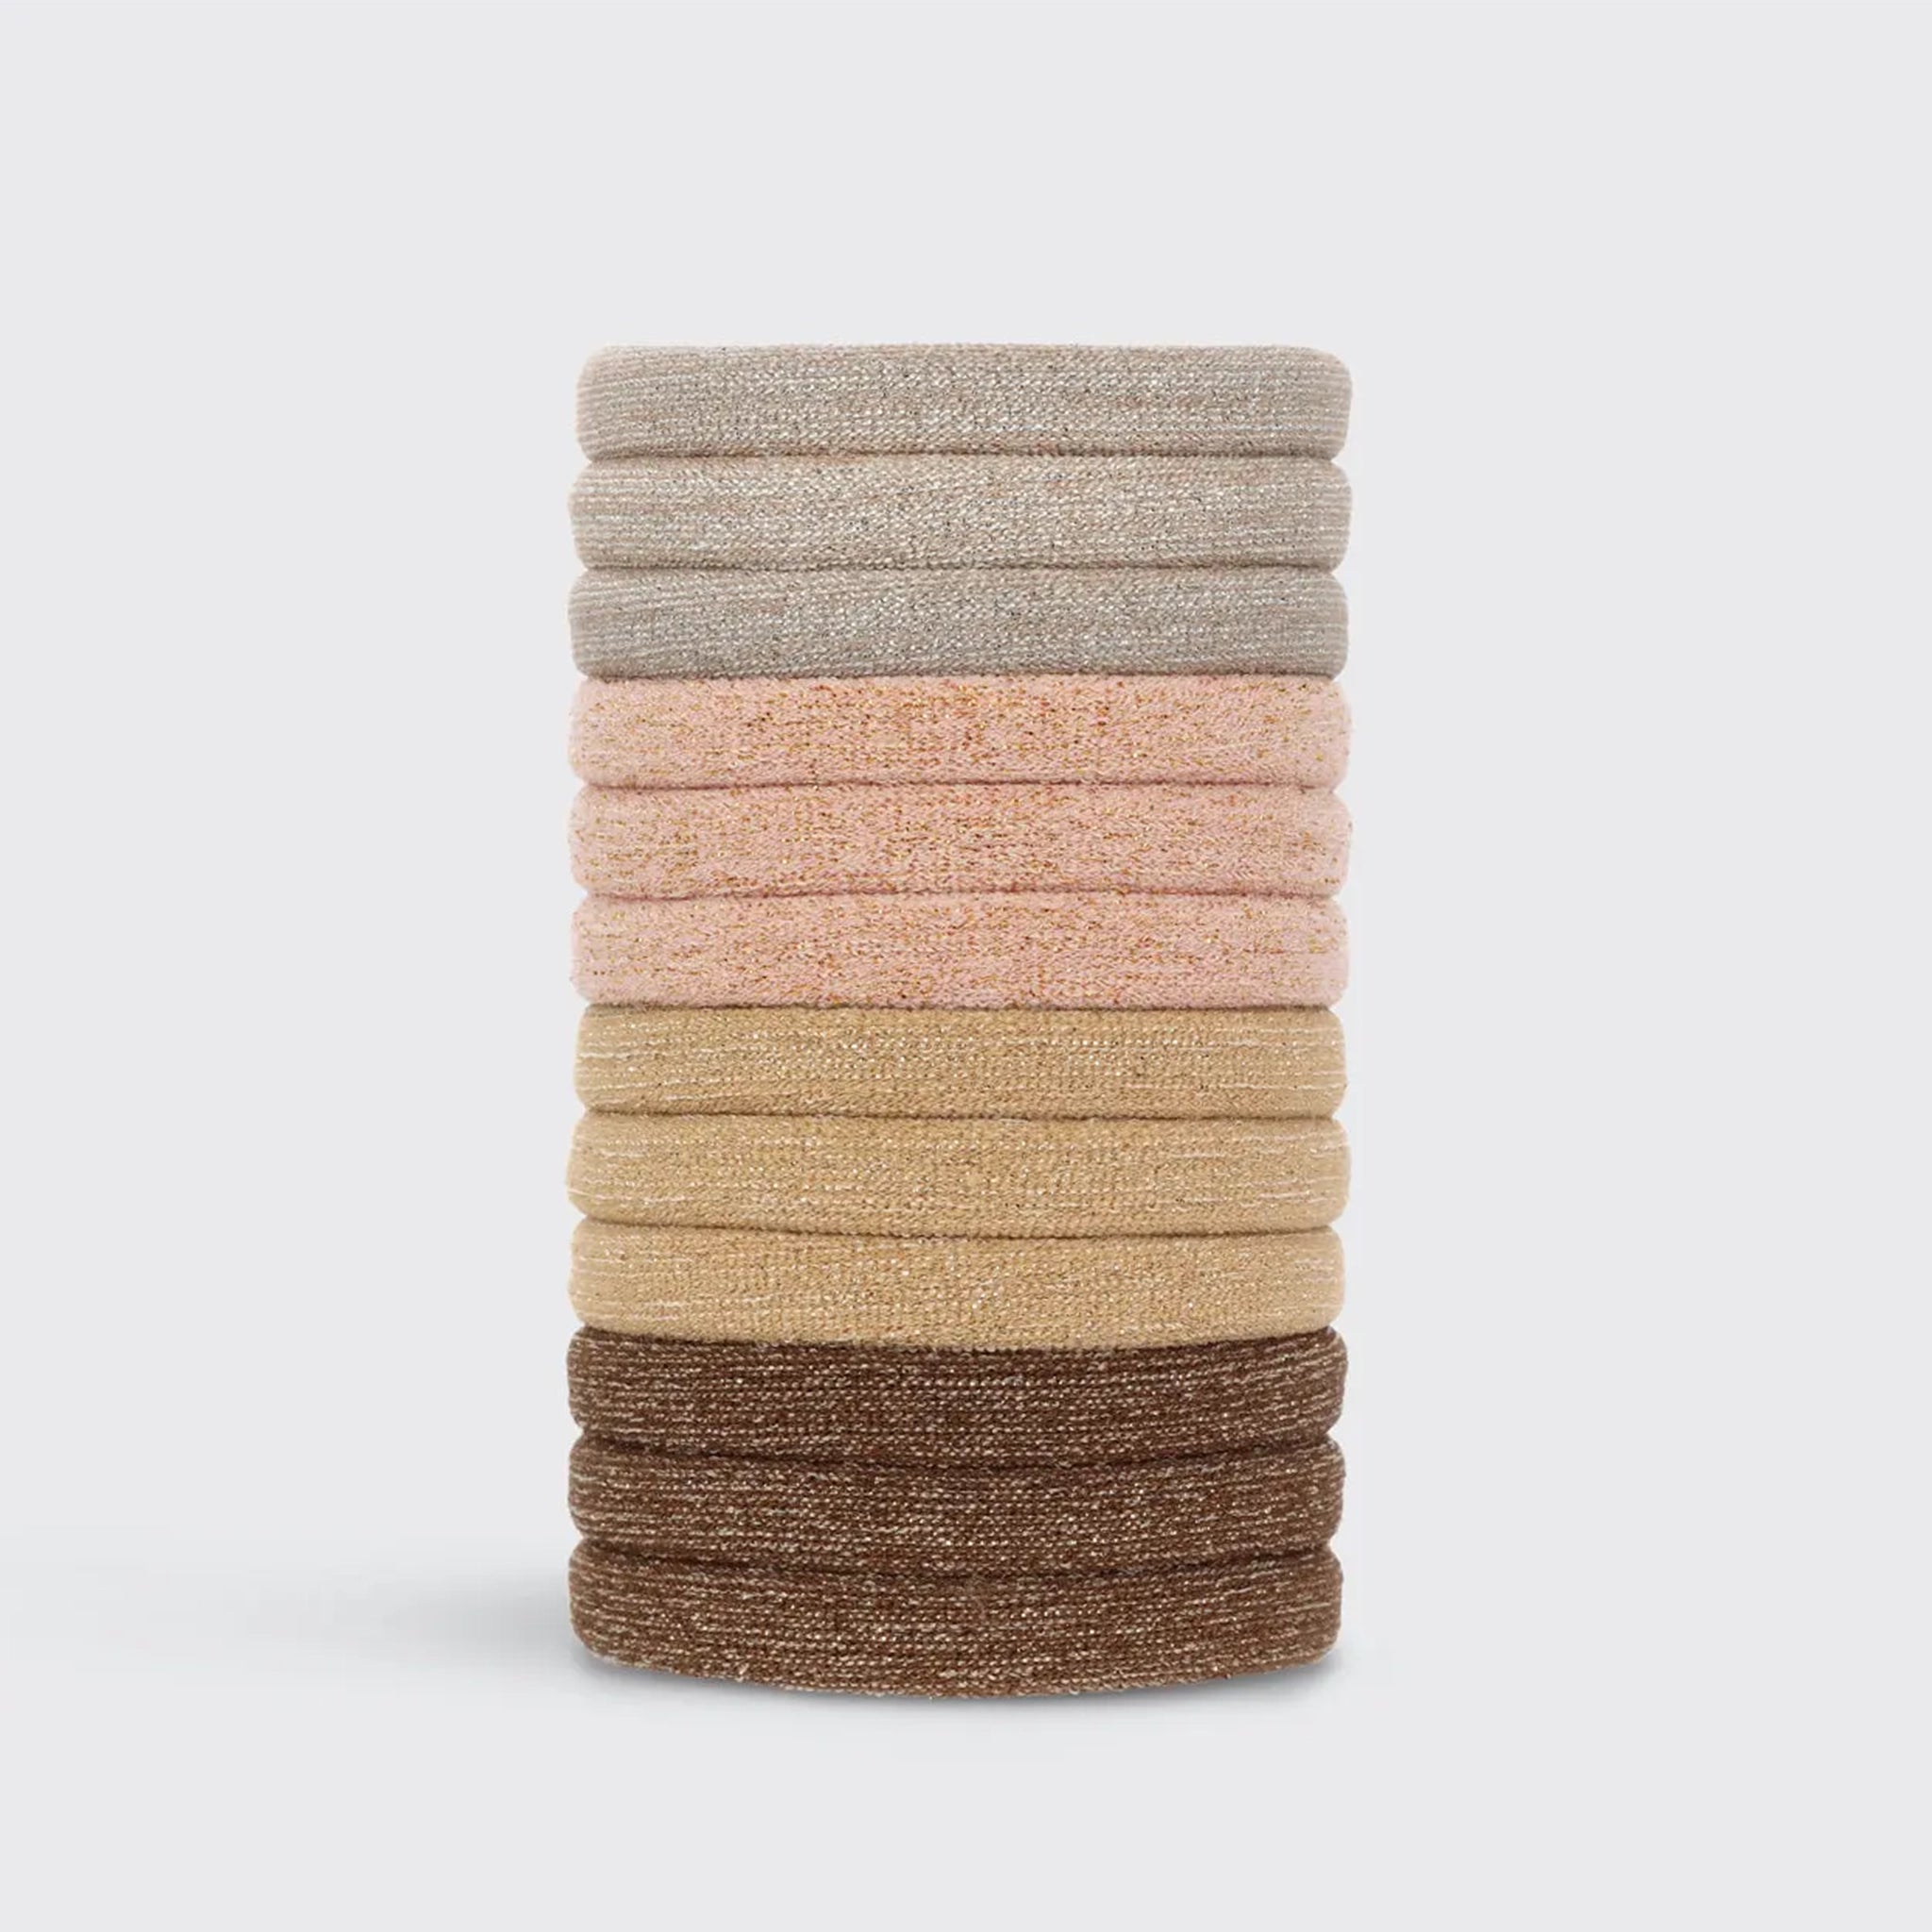 A stack of neutral elastic hair ties with a glitter finish. The colors range from a neutral tans, brown, and grey. 